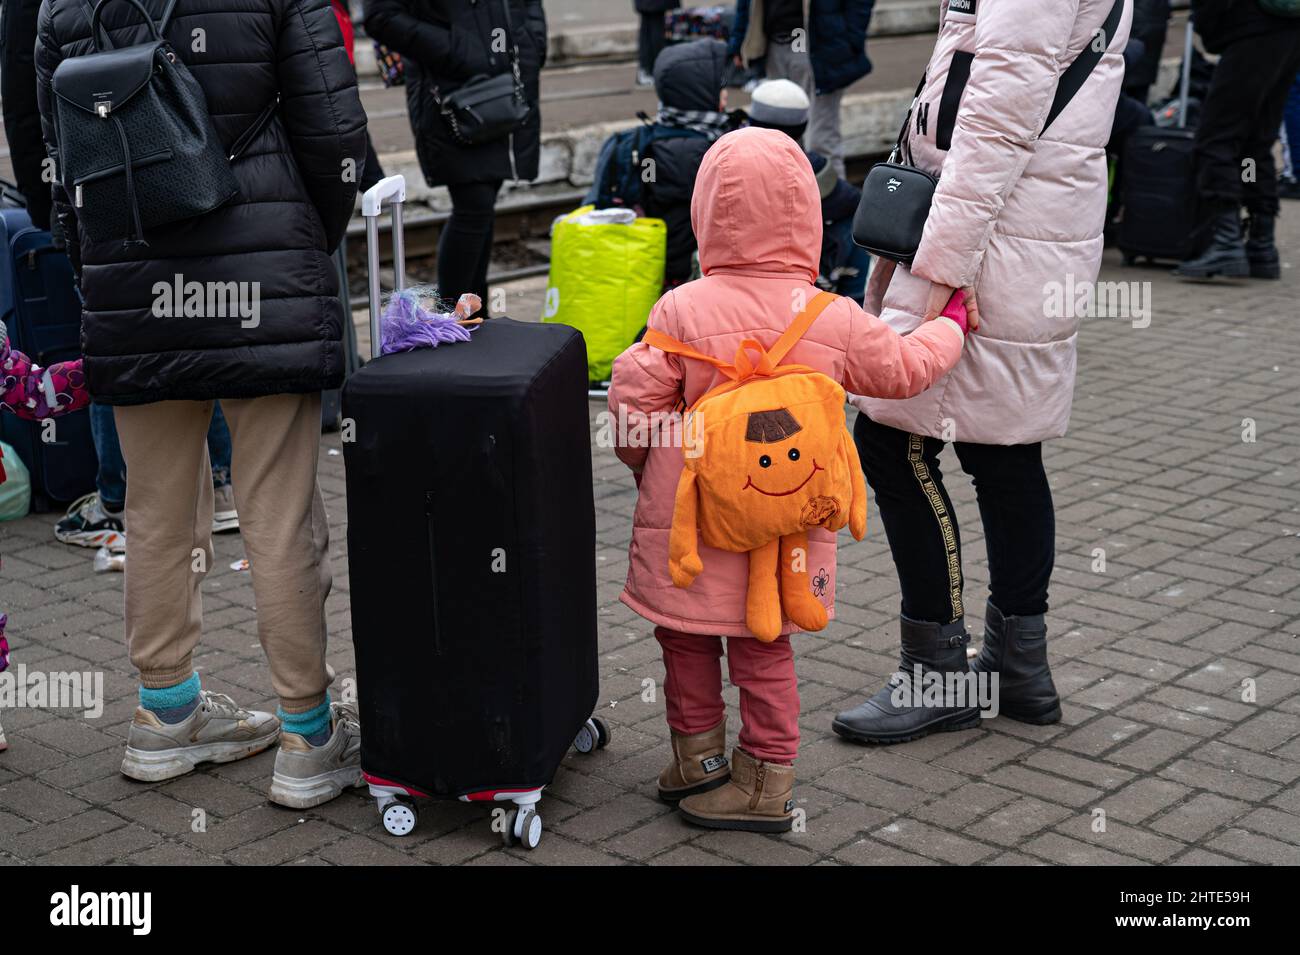 27th February 2022. Lviv Train Station, Ukraine. As snow fell on Sunday, some had to turn around and walk back to the nearest main city to find other ways out as desperation grows at Ukraine border as more than half a million refugees flee war - Copyright: Bel Trew/The Credit: Independent/Alamy Live News Stock Photo